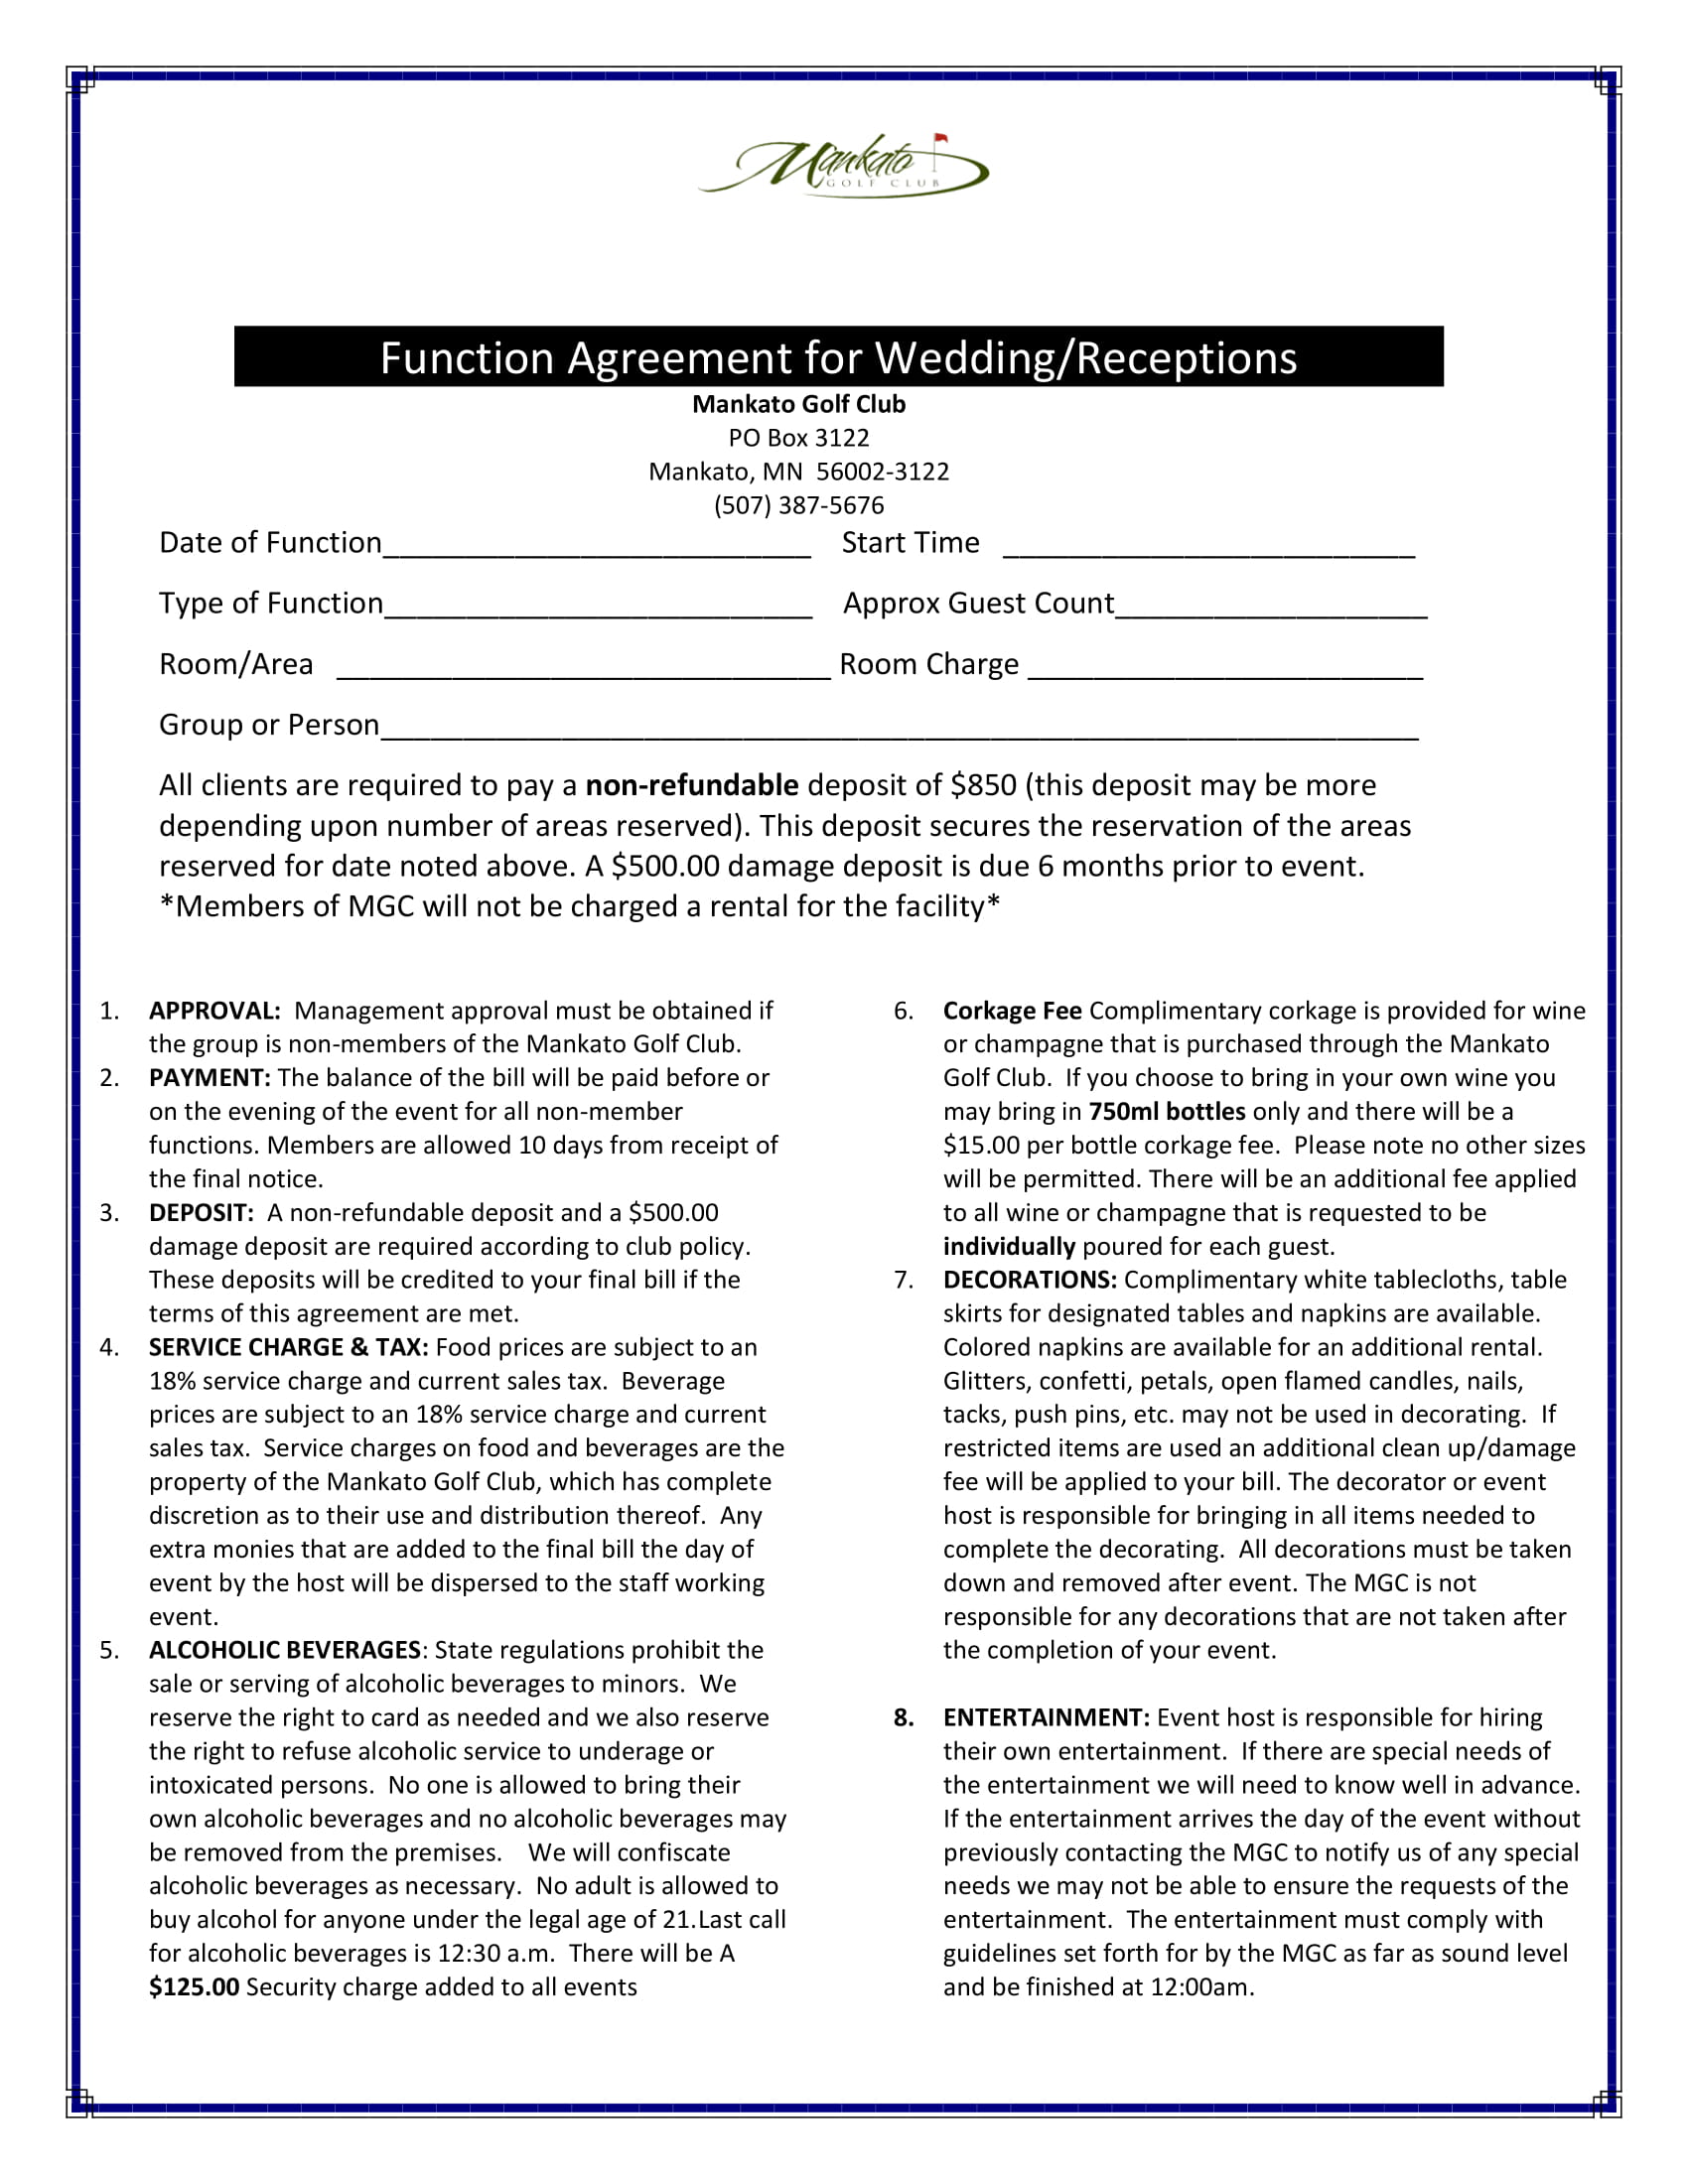 golf club function agreement contract form 1